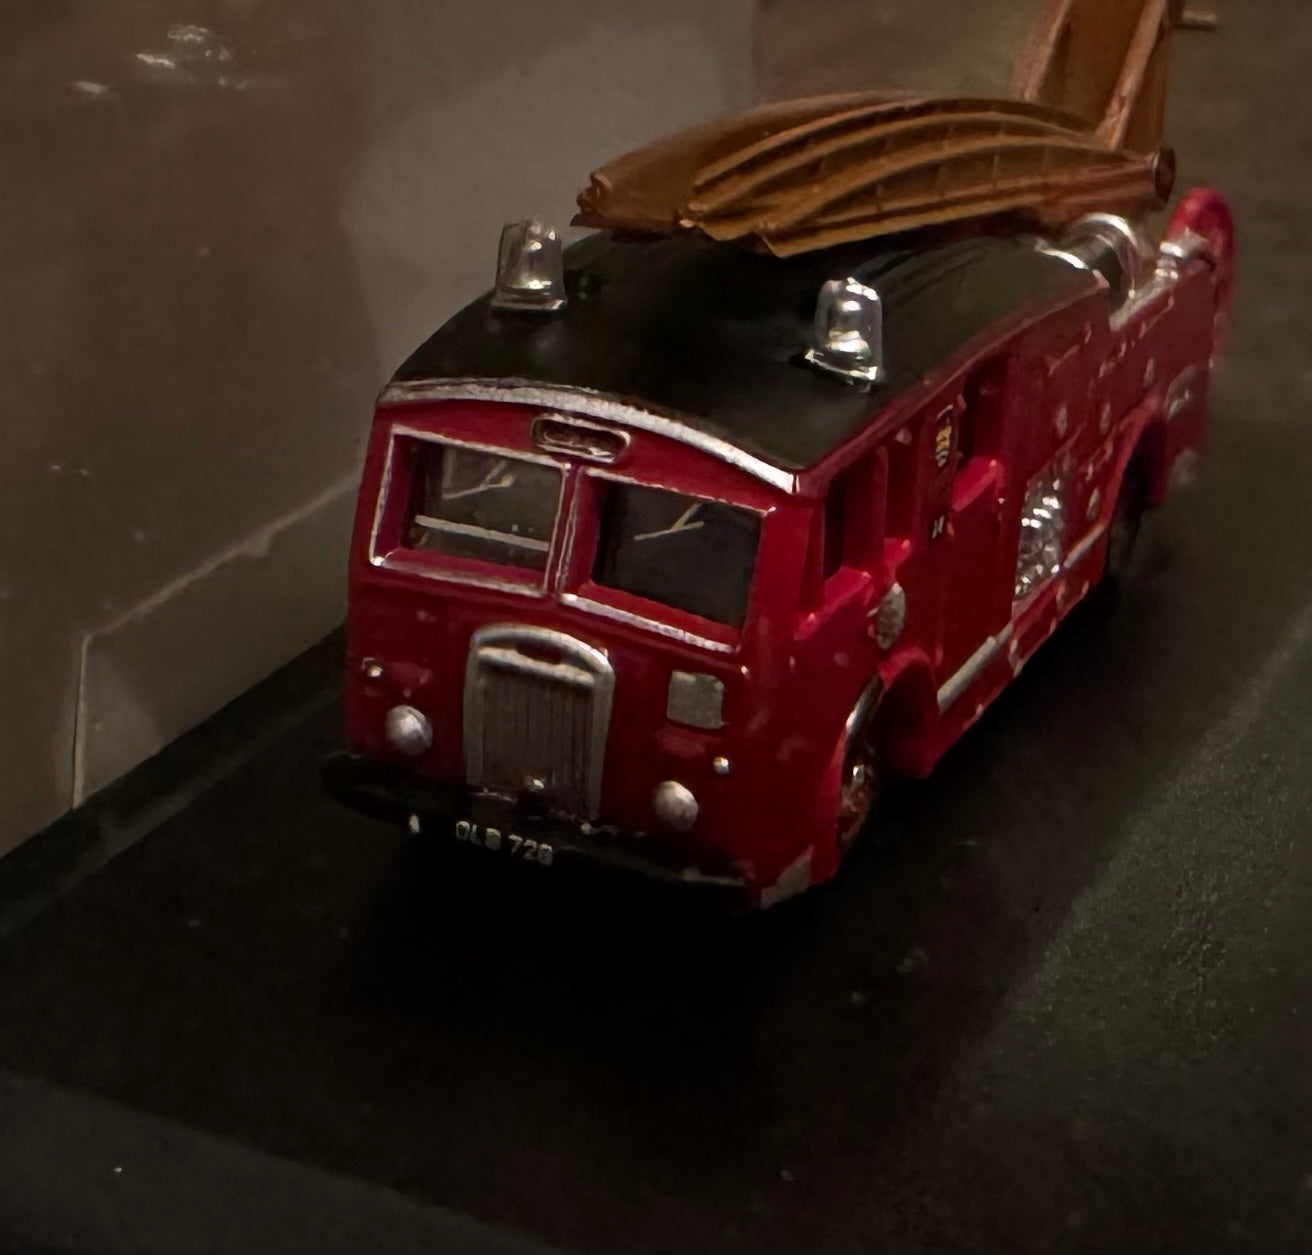 Oxford Die-cast (N Scale / 1:148 Scale), Dennis F12 Fire Engine in London Fire brigade livery.